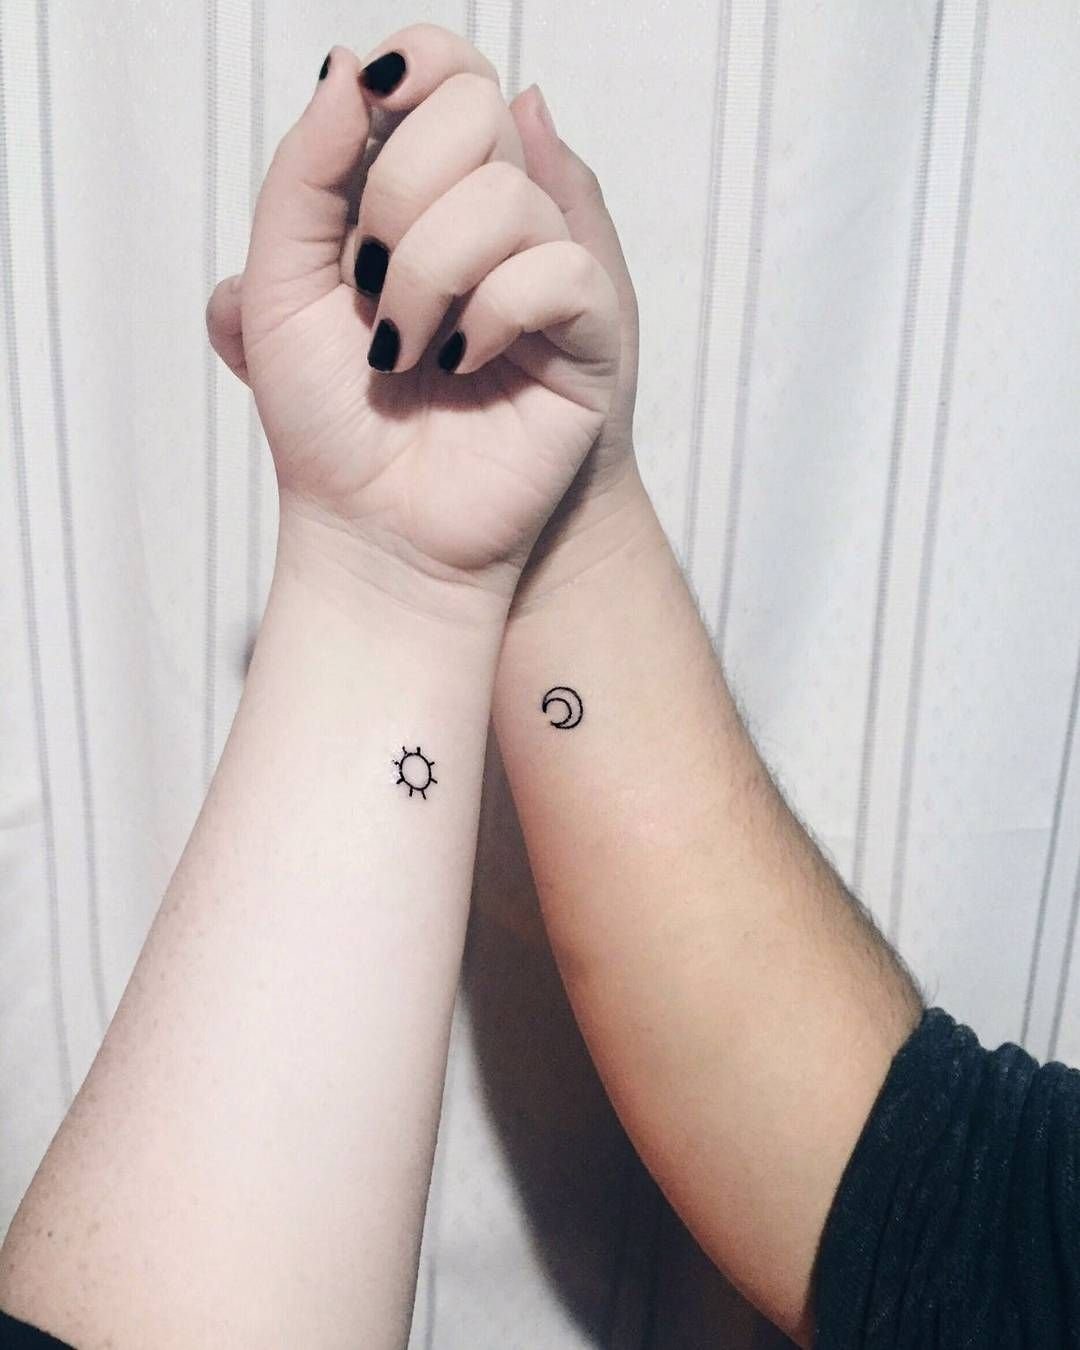 10 Stylish His And Her Matching Tattoos Ideas 40 inspirational creative tattoo ideas for men and women matching 1 2022